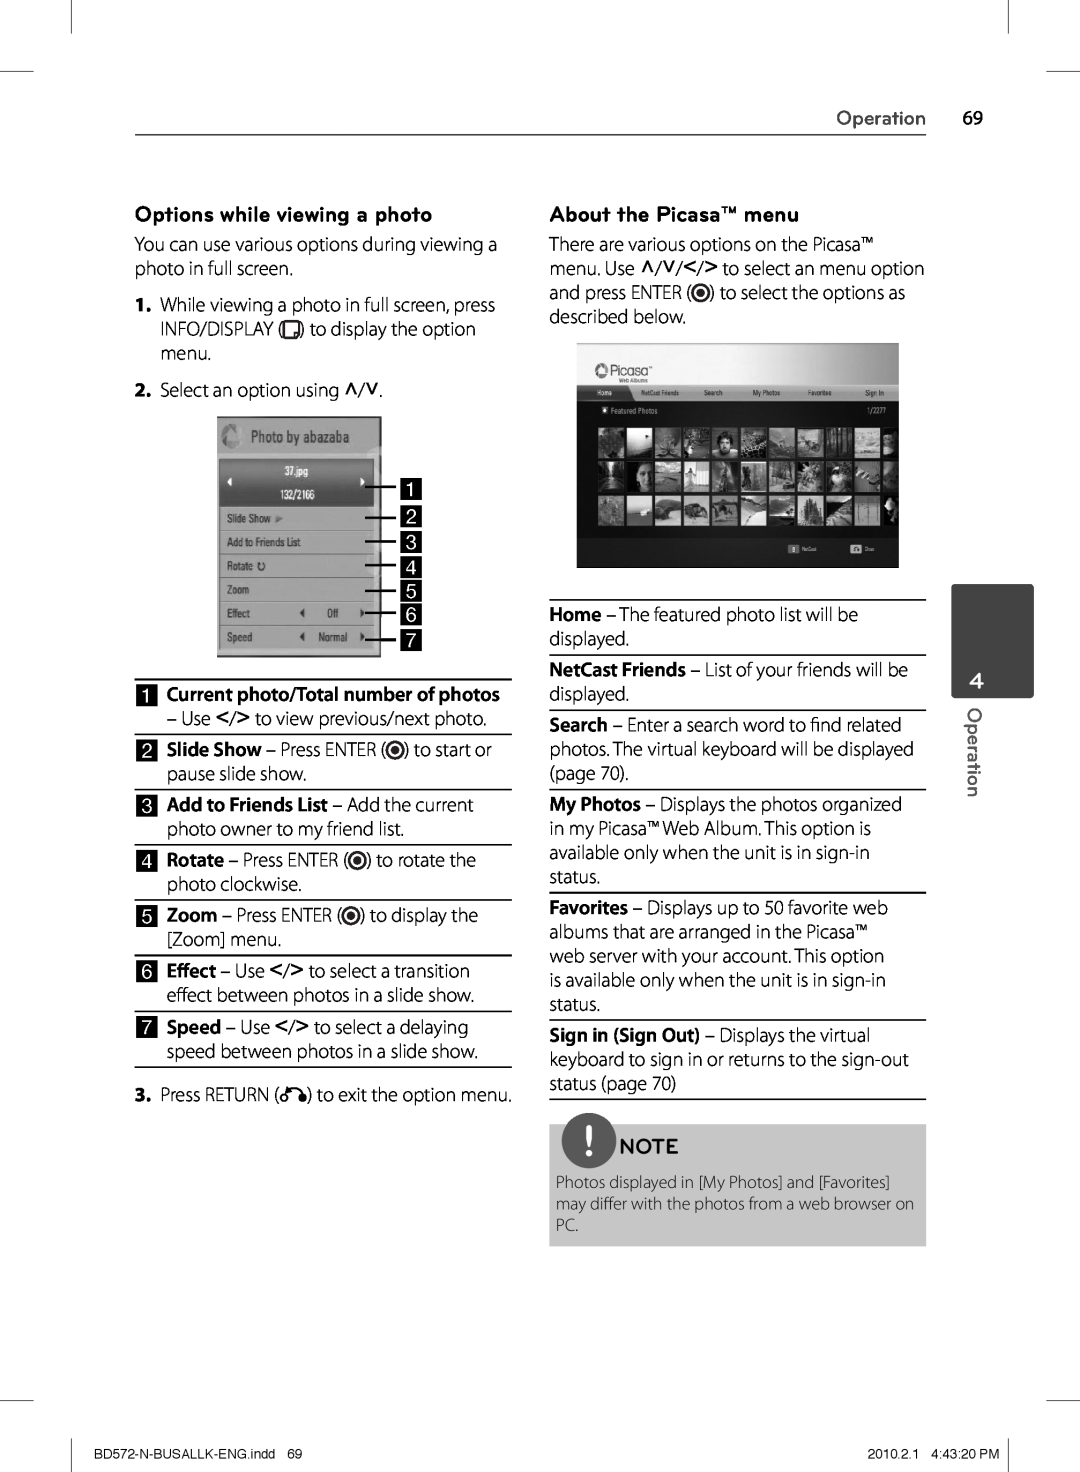 LG Electronics BD570 owner manual Options while viewing a photo, About the Picasa menu, a b c d e f g, Operation 